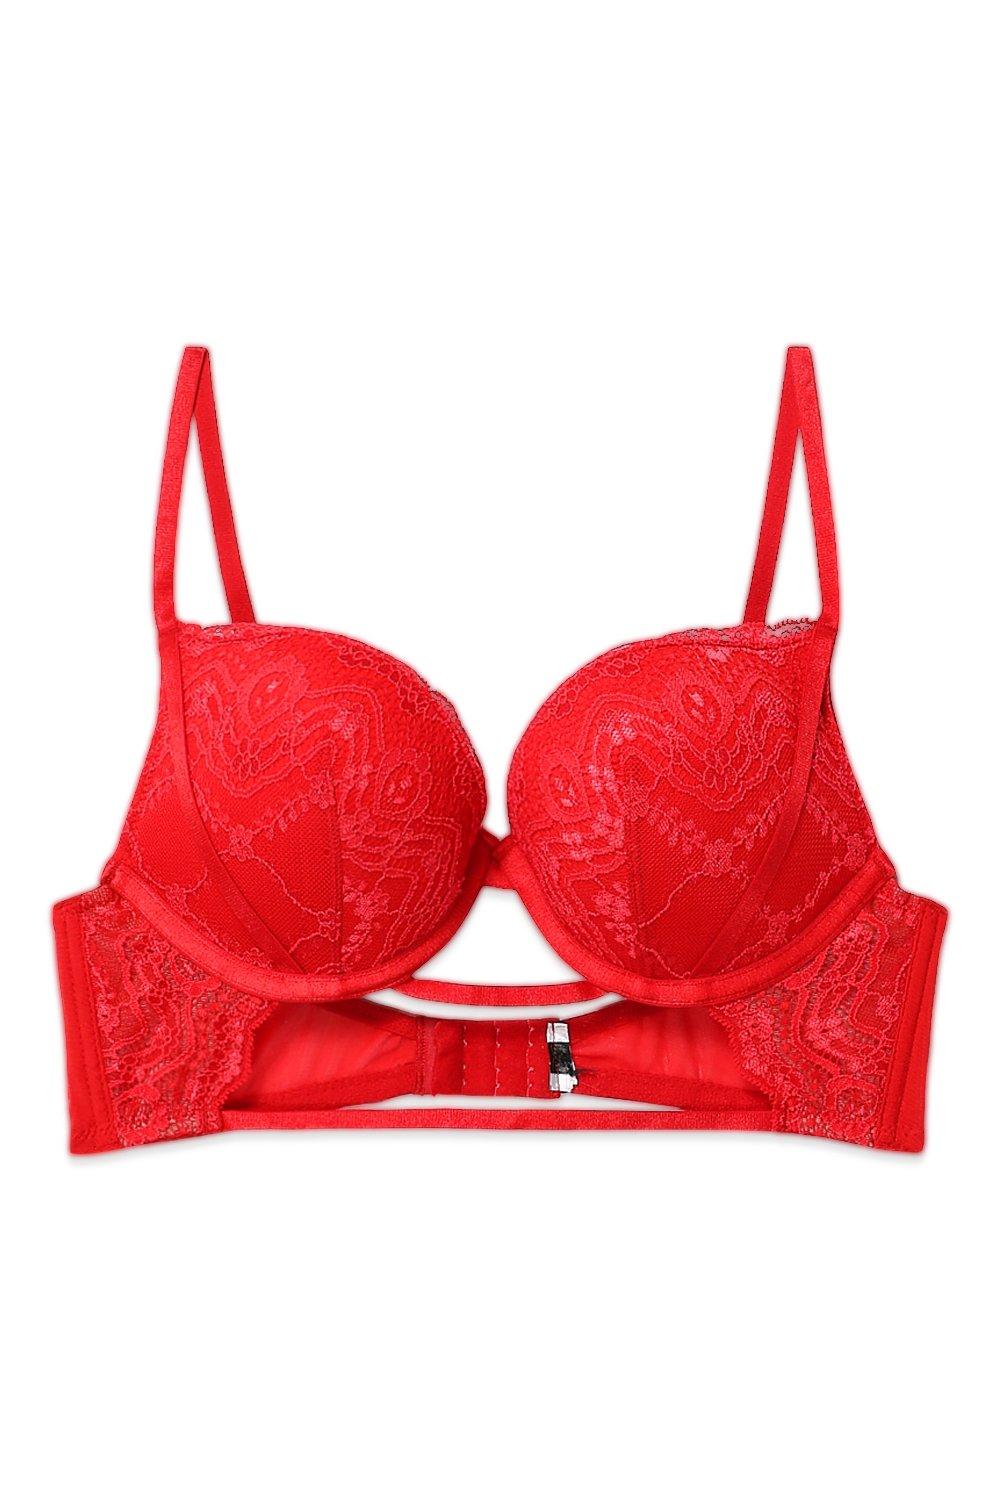 HAIEWRDJ Women's Lace Plus Size Underwired Push Up Adjustable Everyday Bras  (Color : Red, Size : 44D) : : Fashion